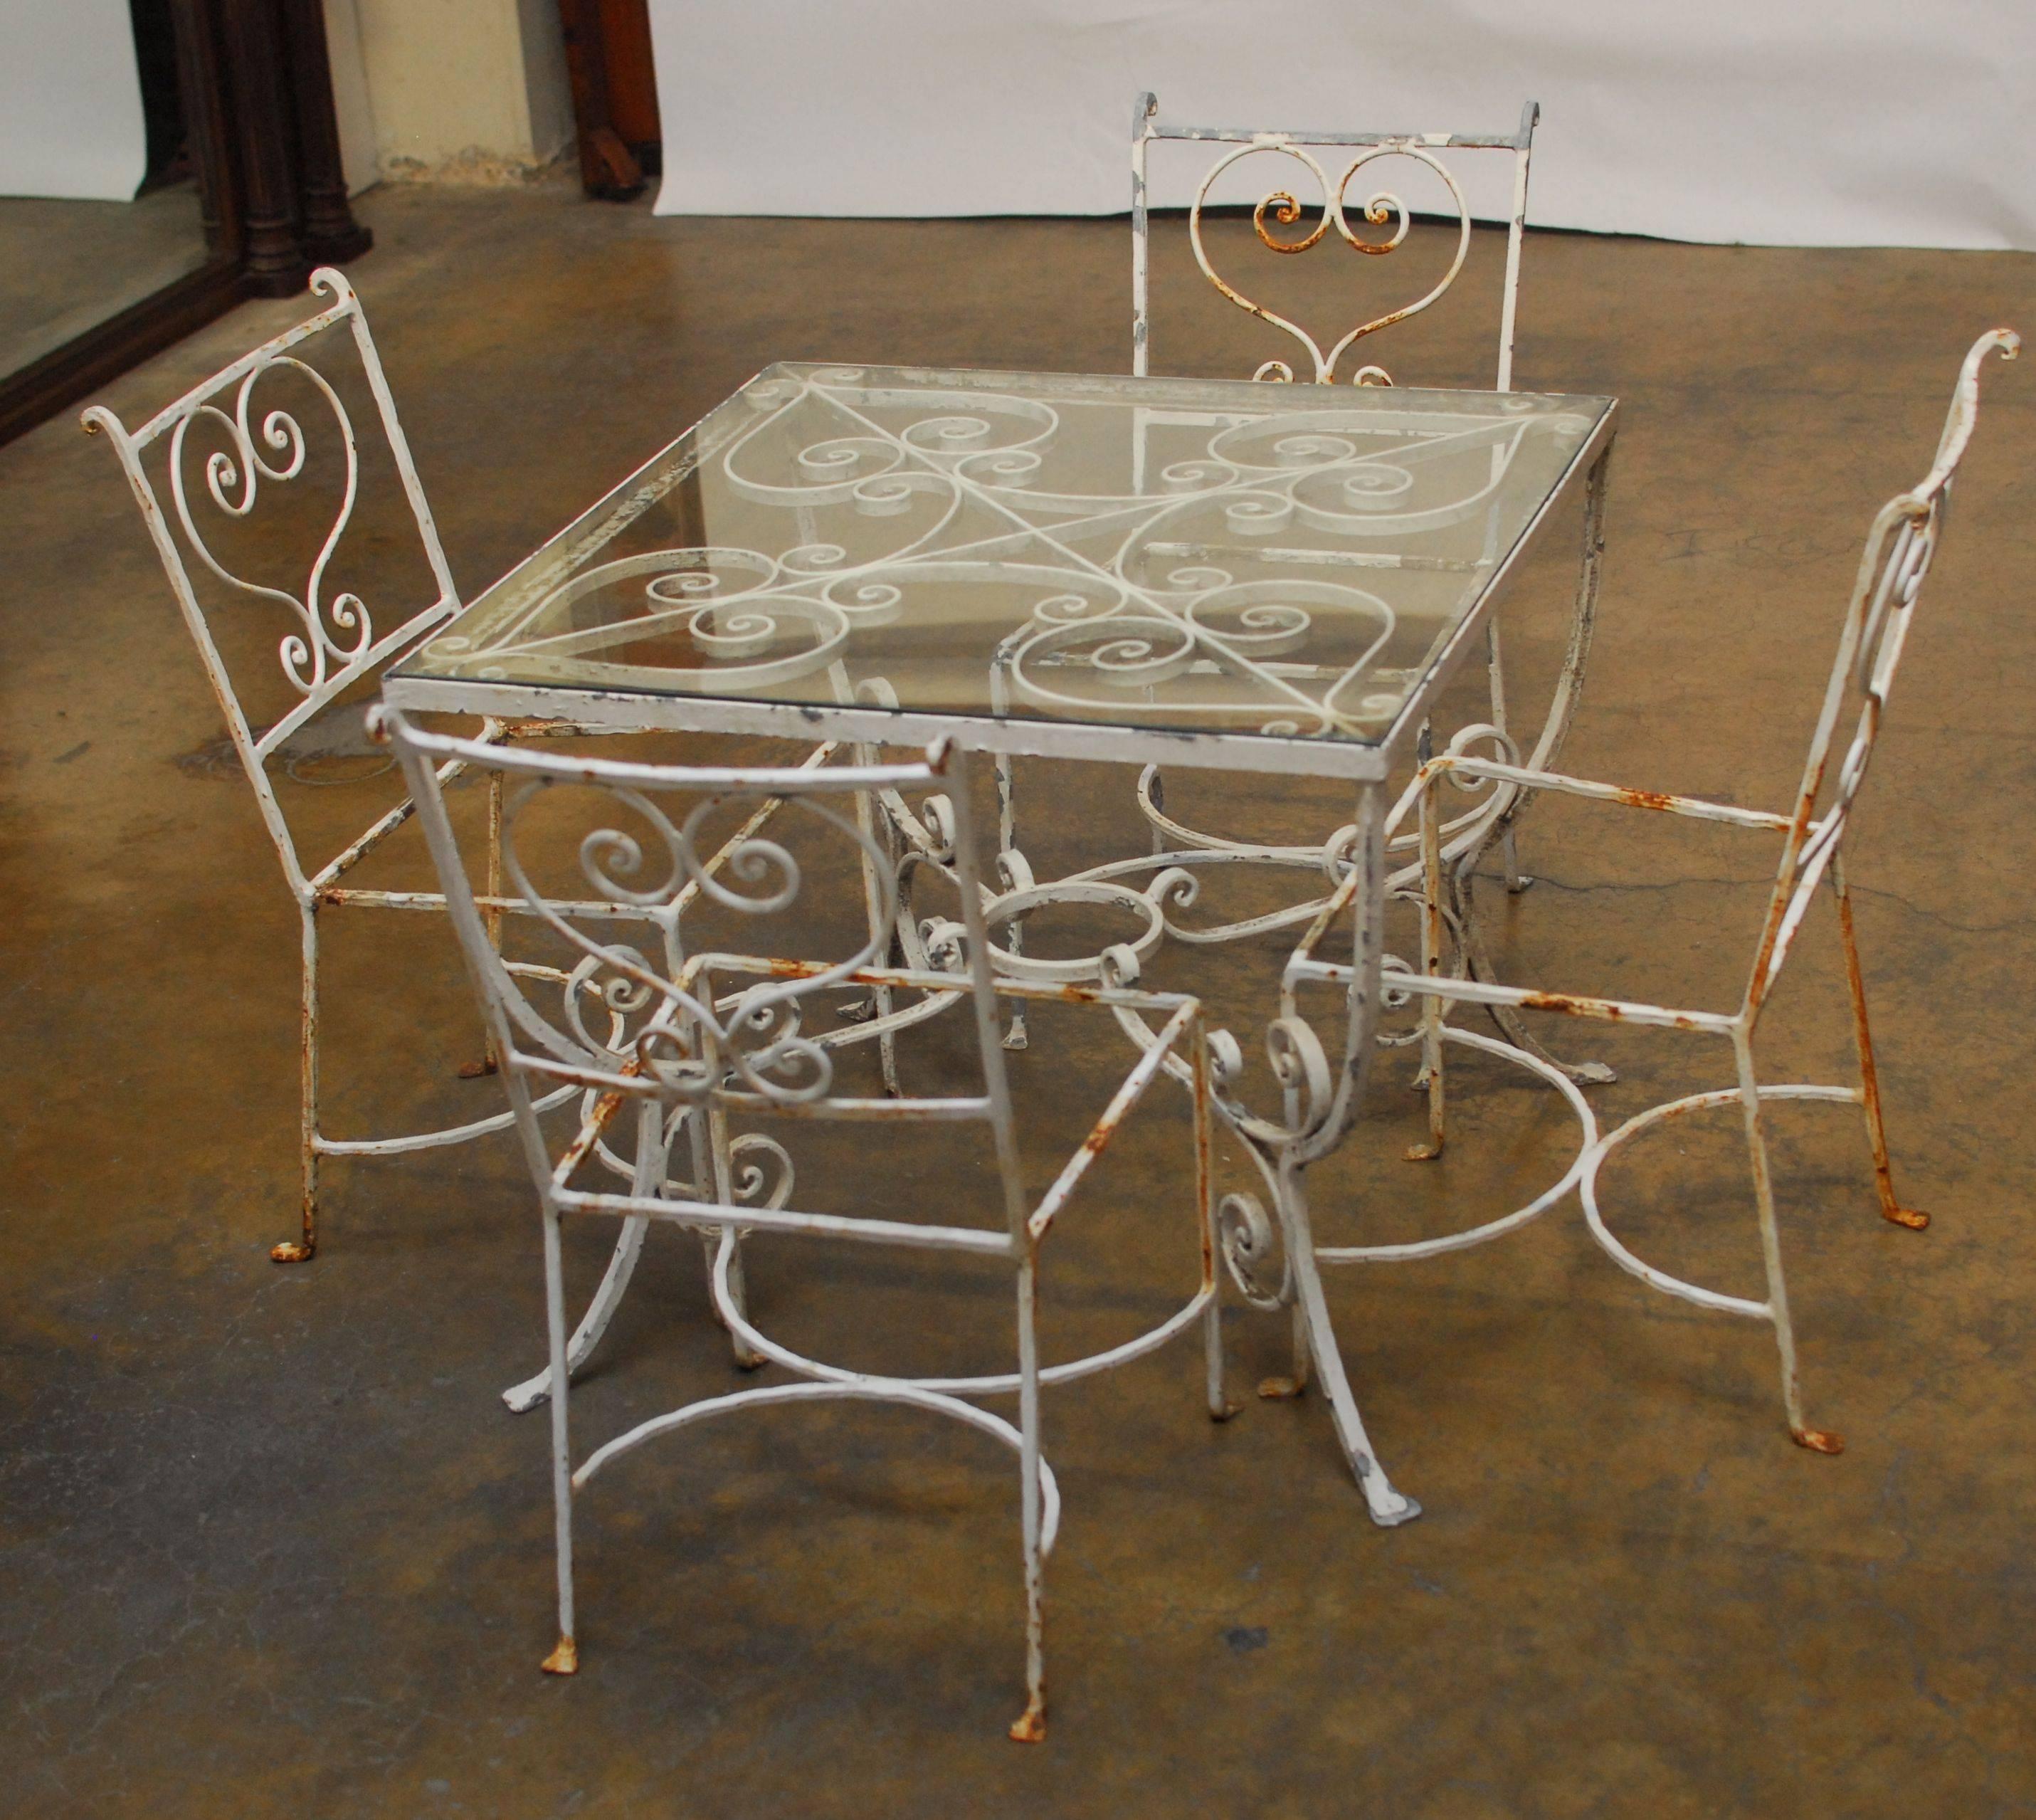 Lovely French garden patio set with 4 garden chairs and a glass top table featuring a plant shelf. The table and chairs have a French scrolled heart motif and sit on flat feet. Original distressed white chippy finish with minor surface rust. The